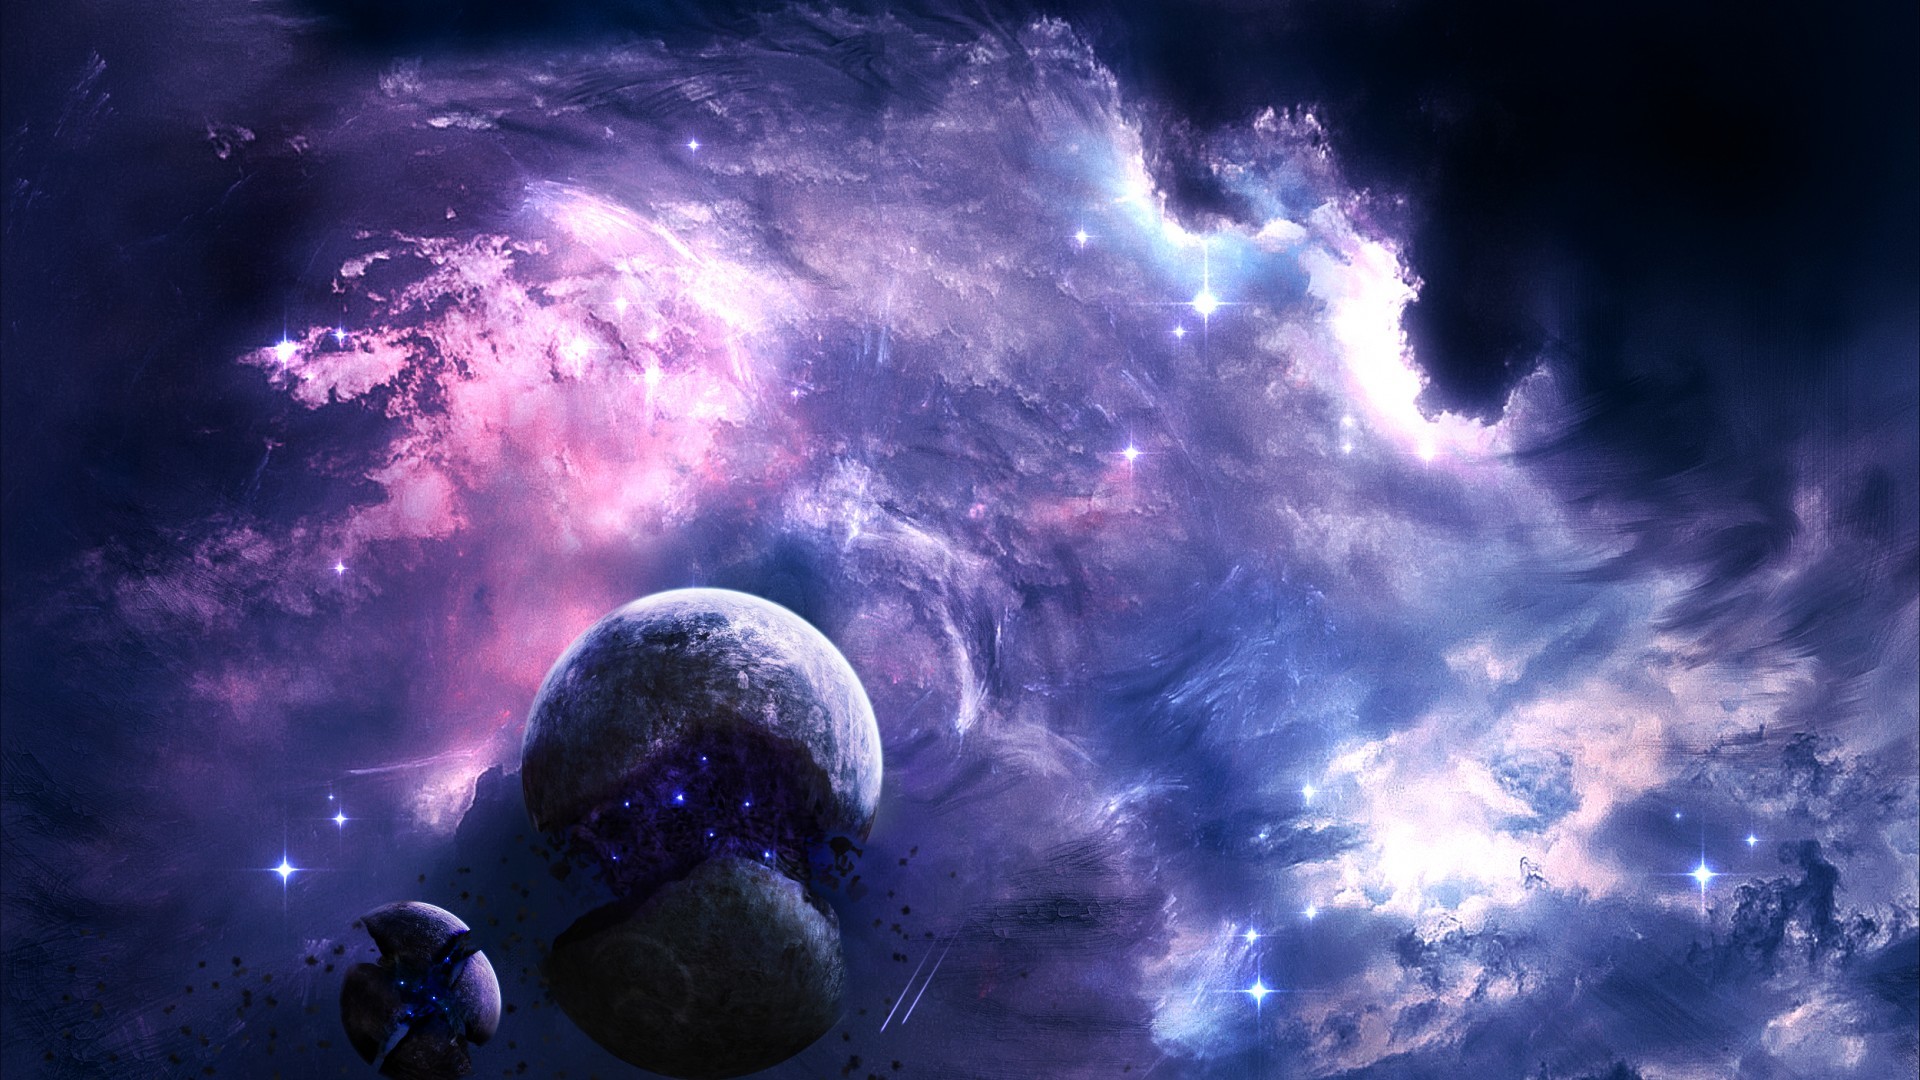 Cool HD Space Wallpaper Image